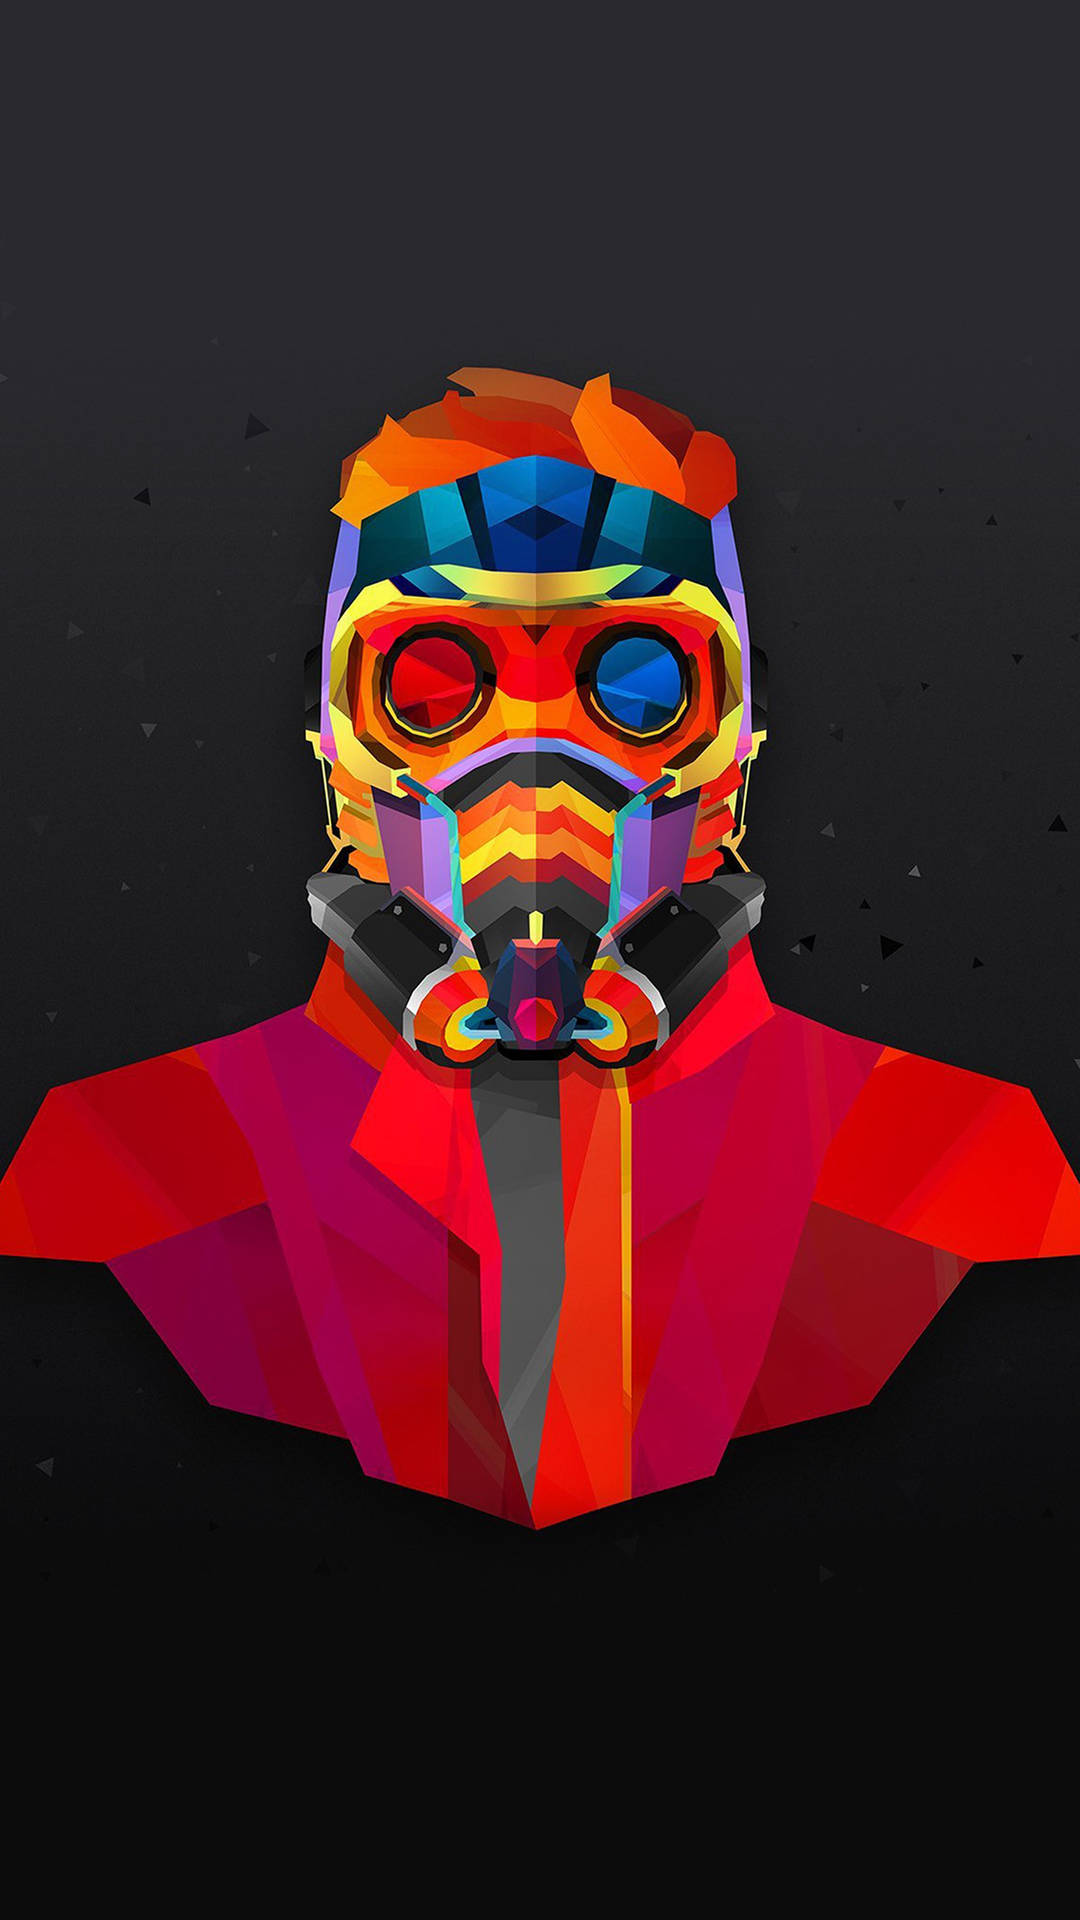 A Man In A Colorful Mask With A Helmet Wallpaper